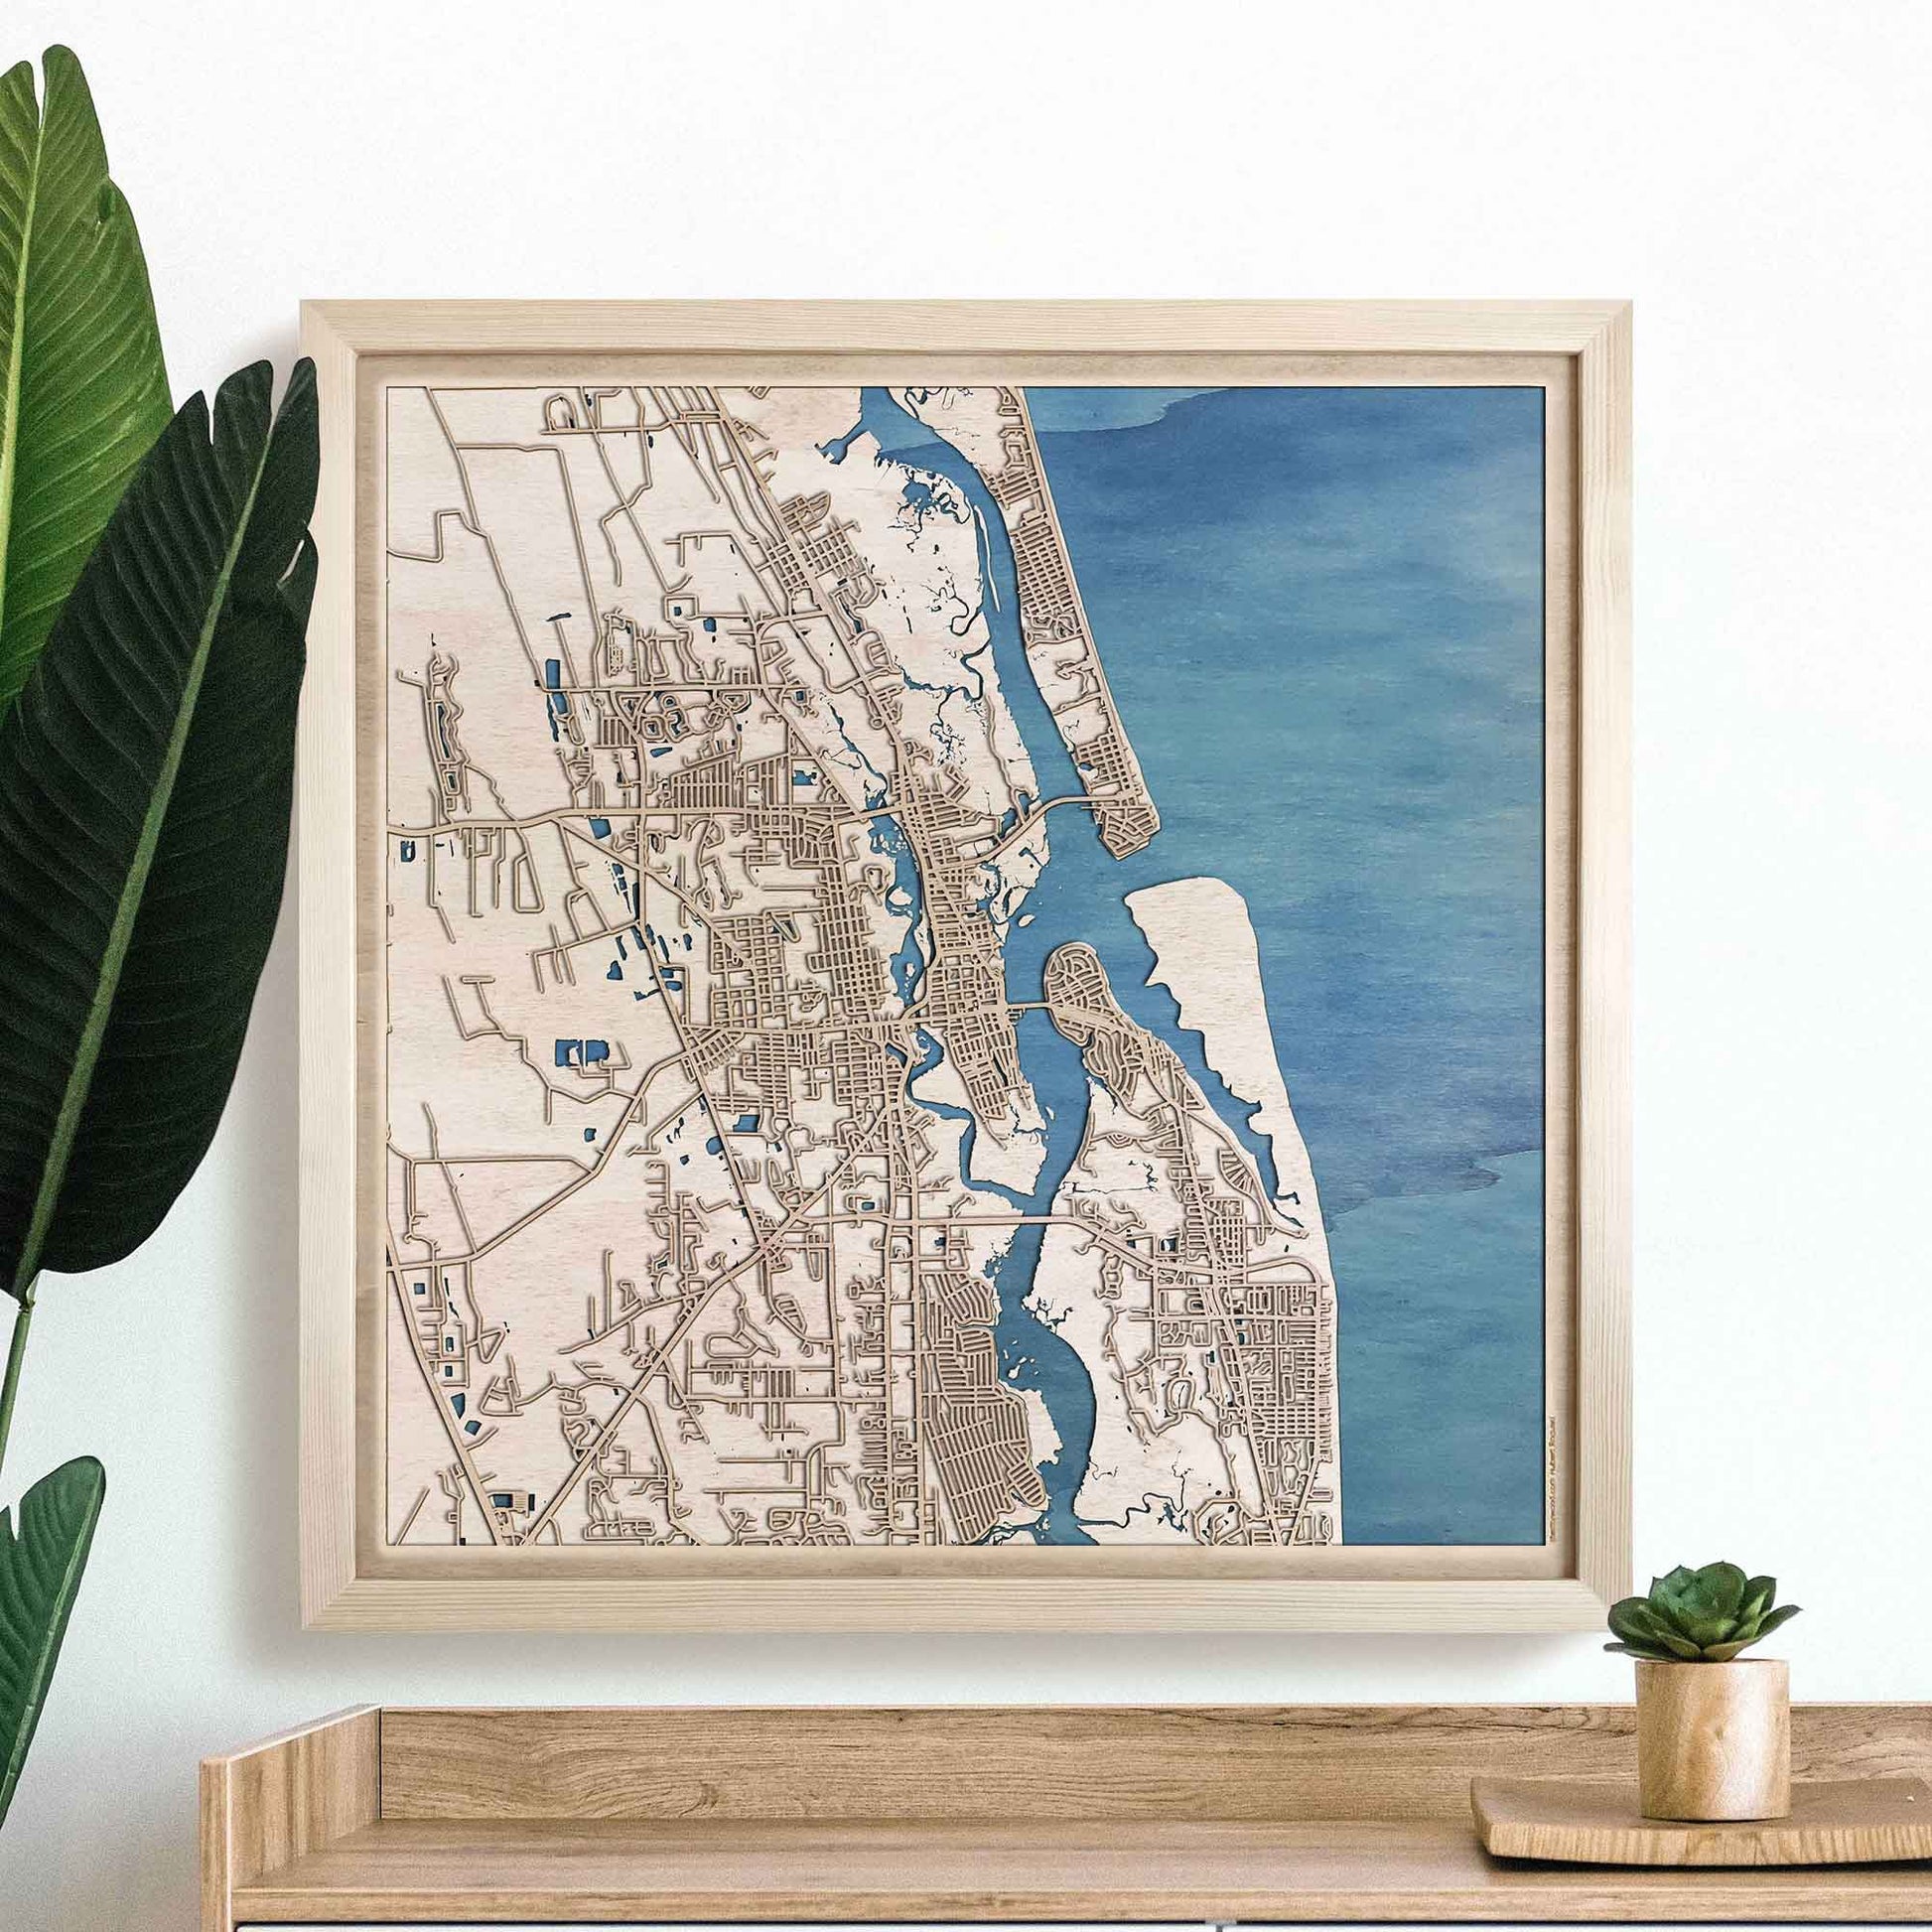 St. Augustine Wooden Map by CityWood - Custom Wood Map Art - Unique Laser Cut Engraved - Anniversary Gift